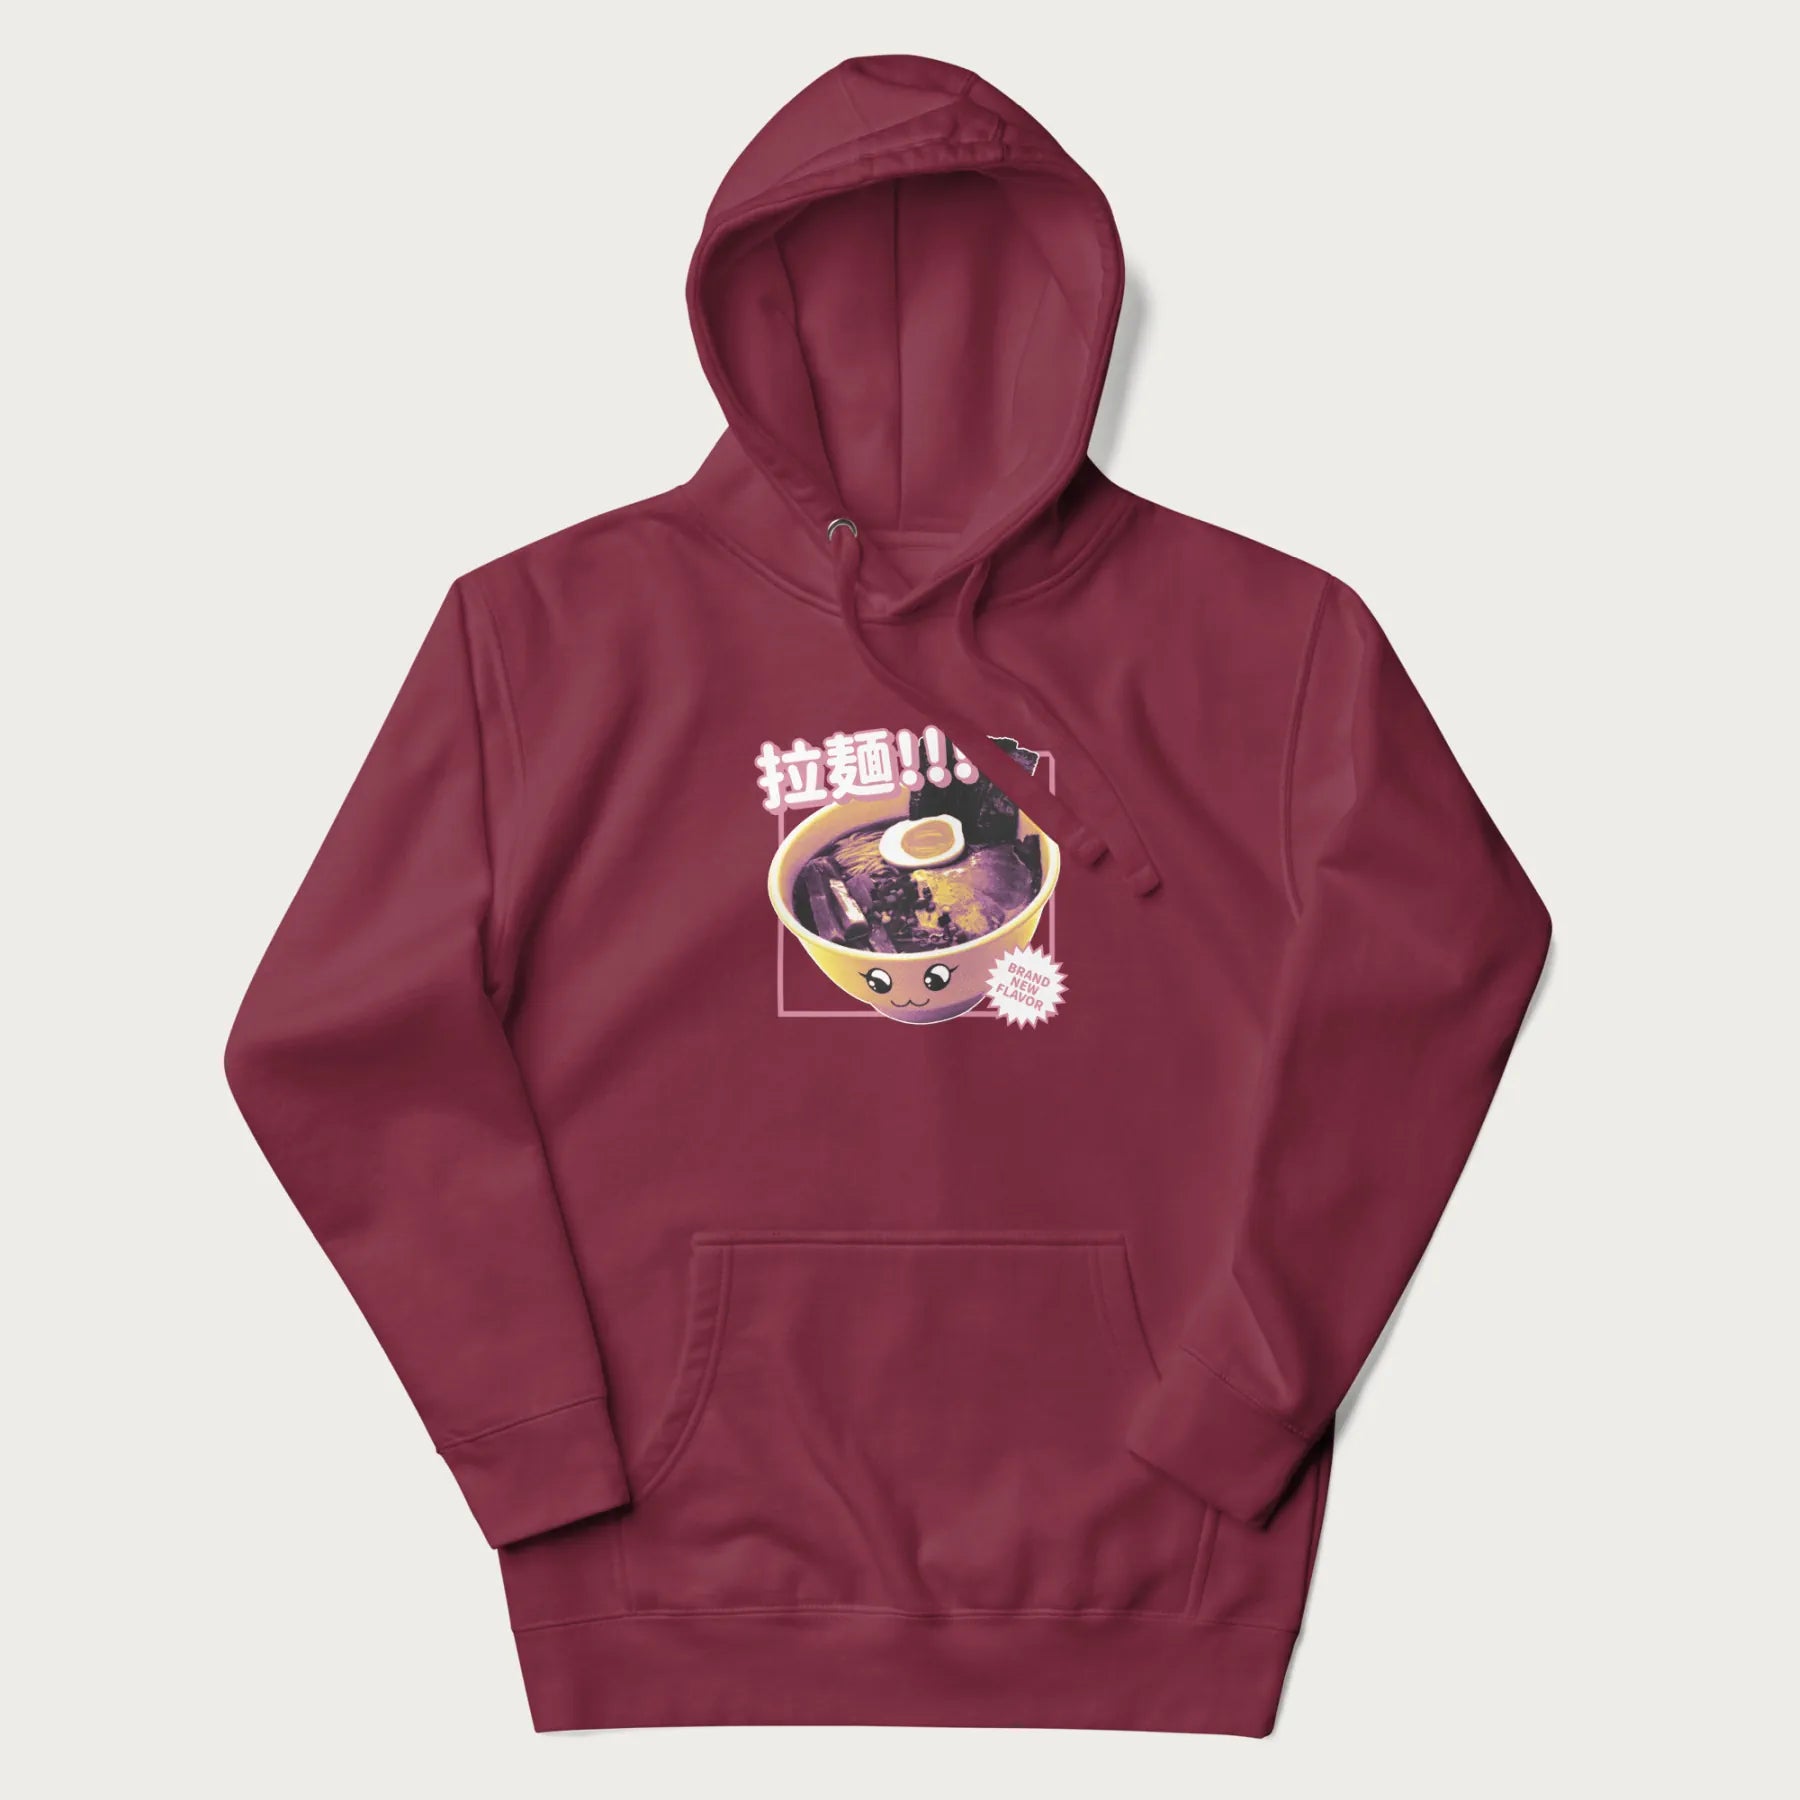 Maroon hoodie with Japanese text '拉麵!!!' (Ramen!!!) in vibrant pink and realistic ramen bowl graphic.